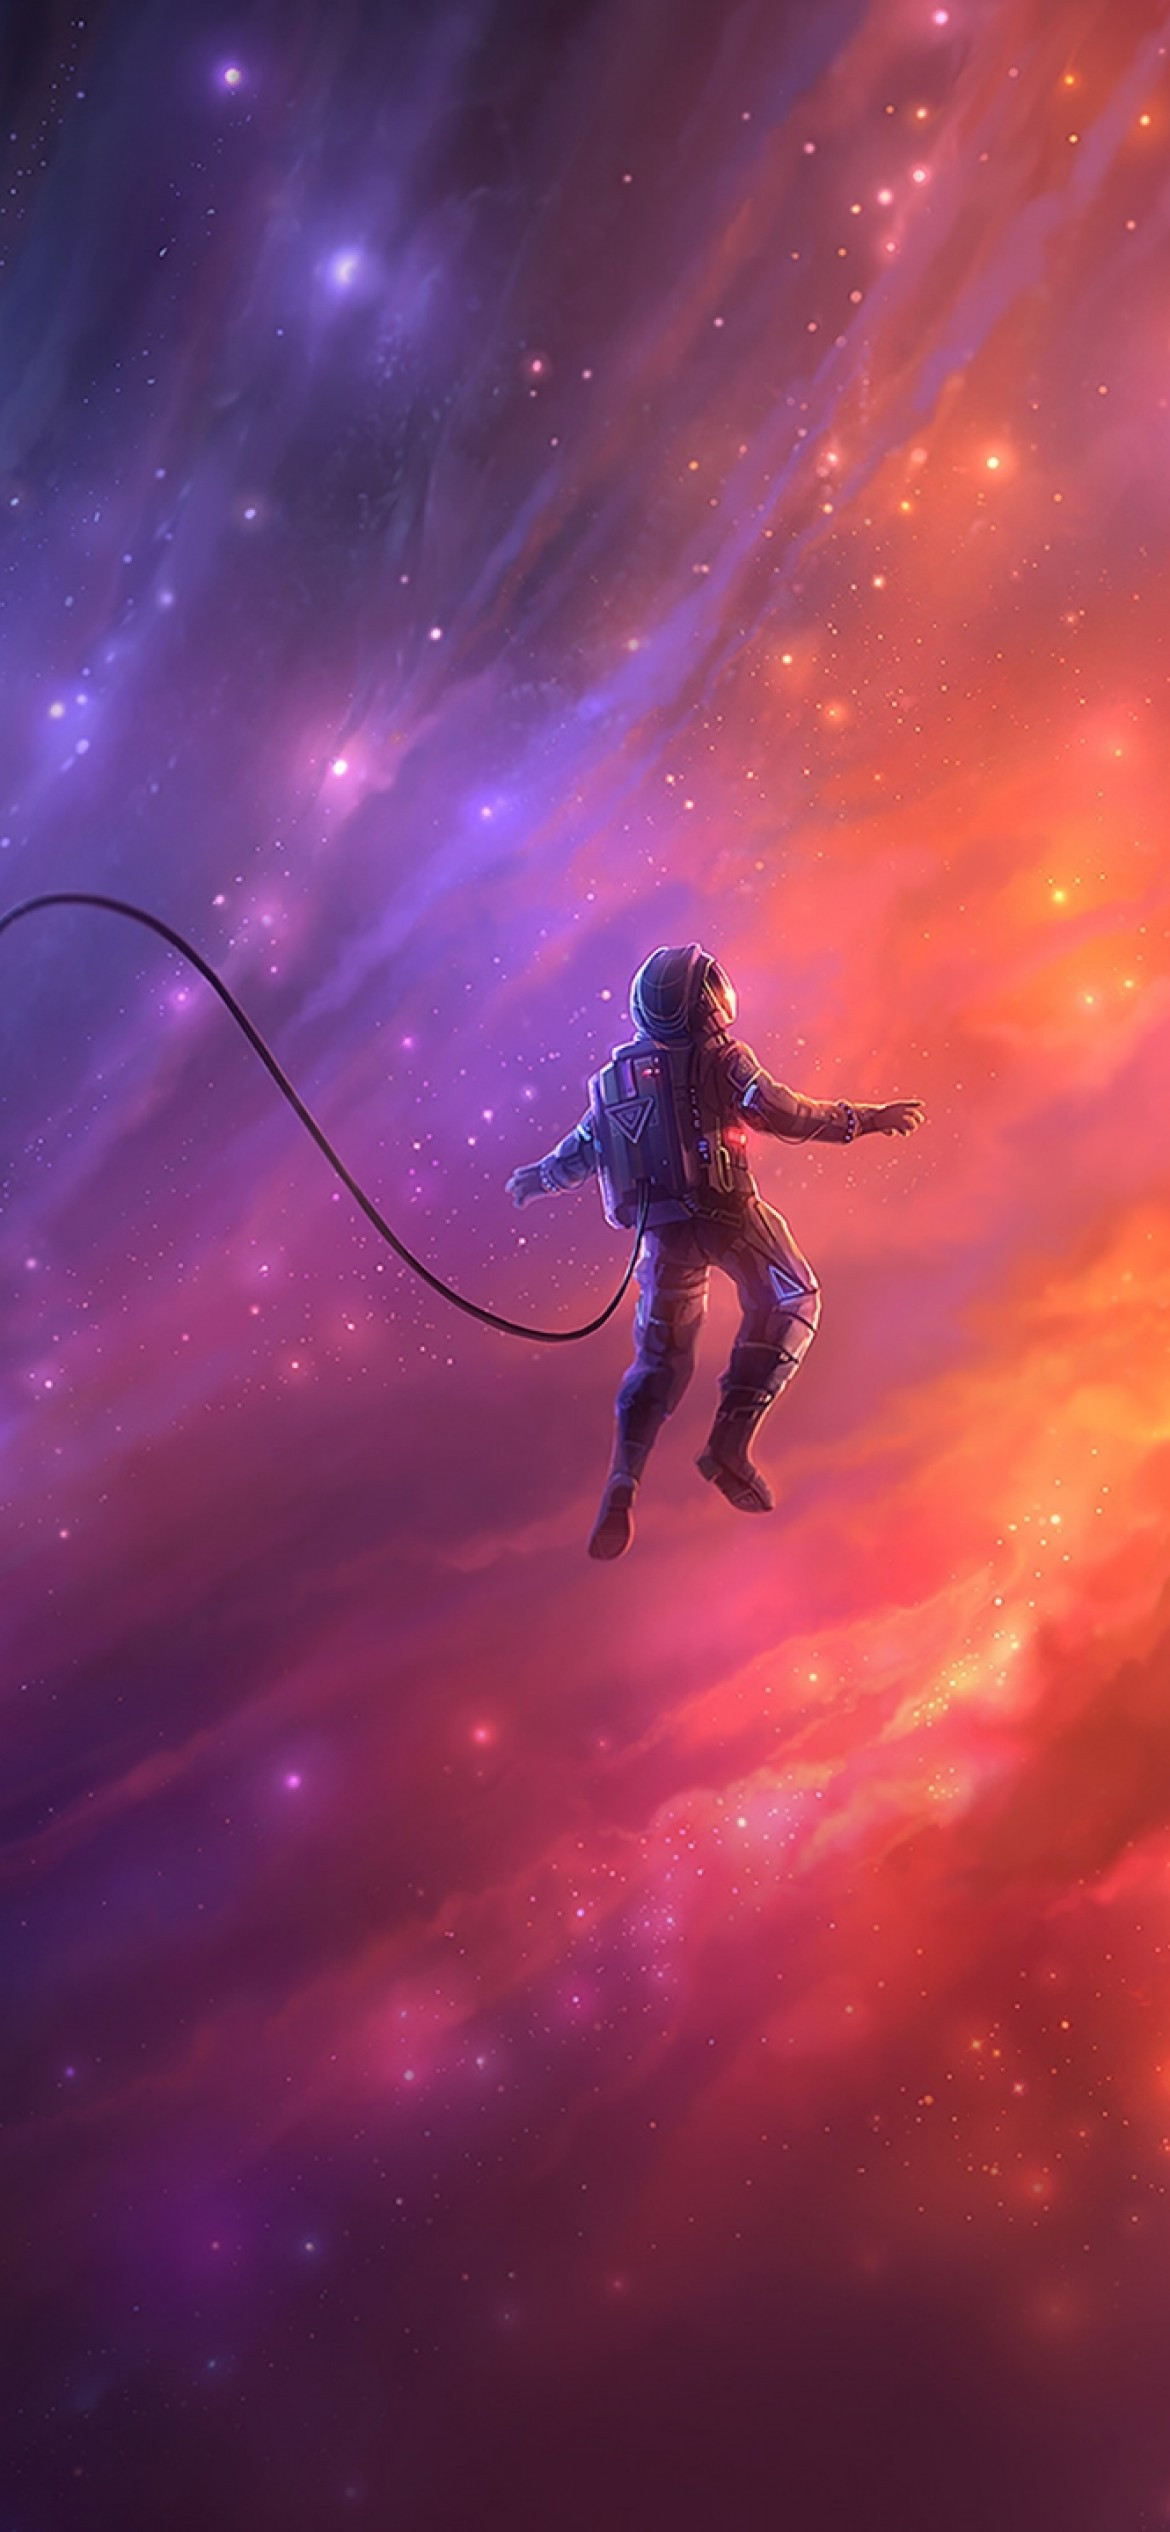 Download 1170x2532 Floating Astronaut, Colorful Nebula, Dreamy, Orange, Two Paths Wallpaper for iPhone 12 Pro